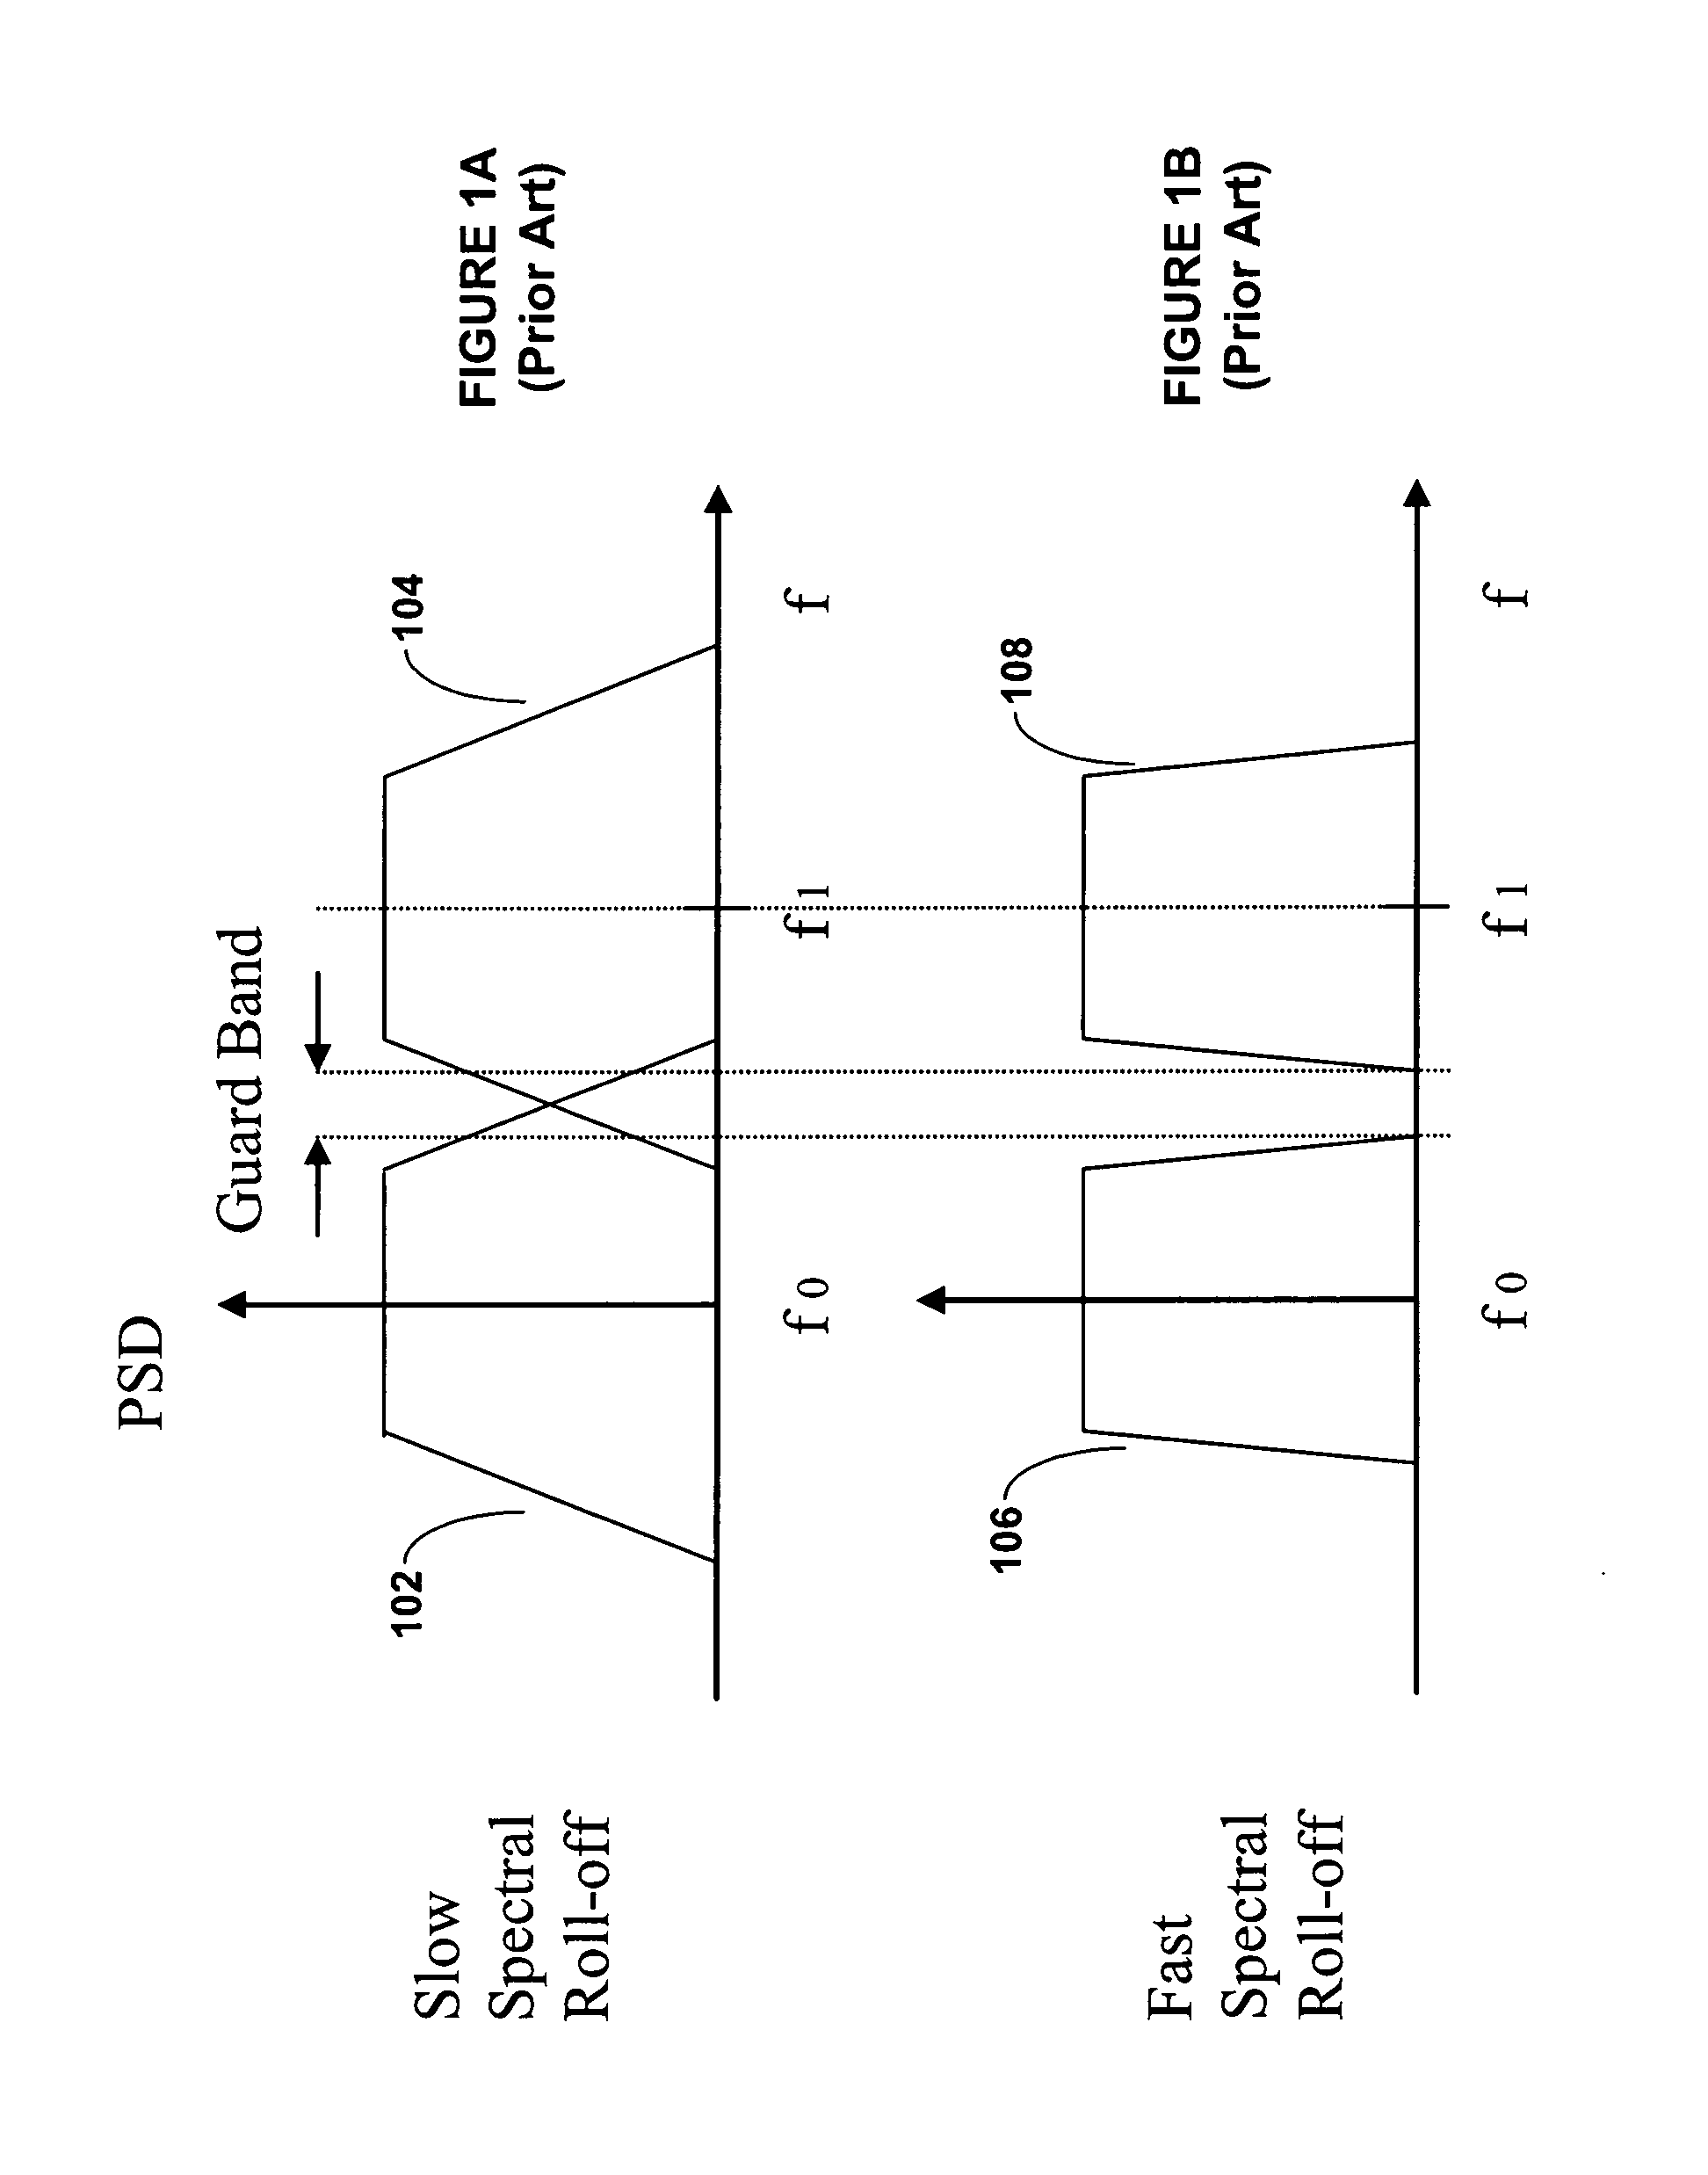 Method and Apparatus for Pulse Optimization for Hardware Implementation